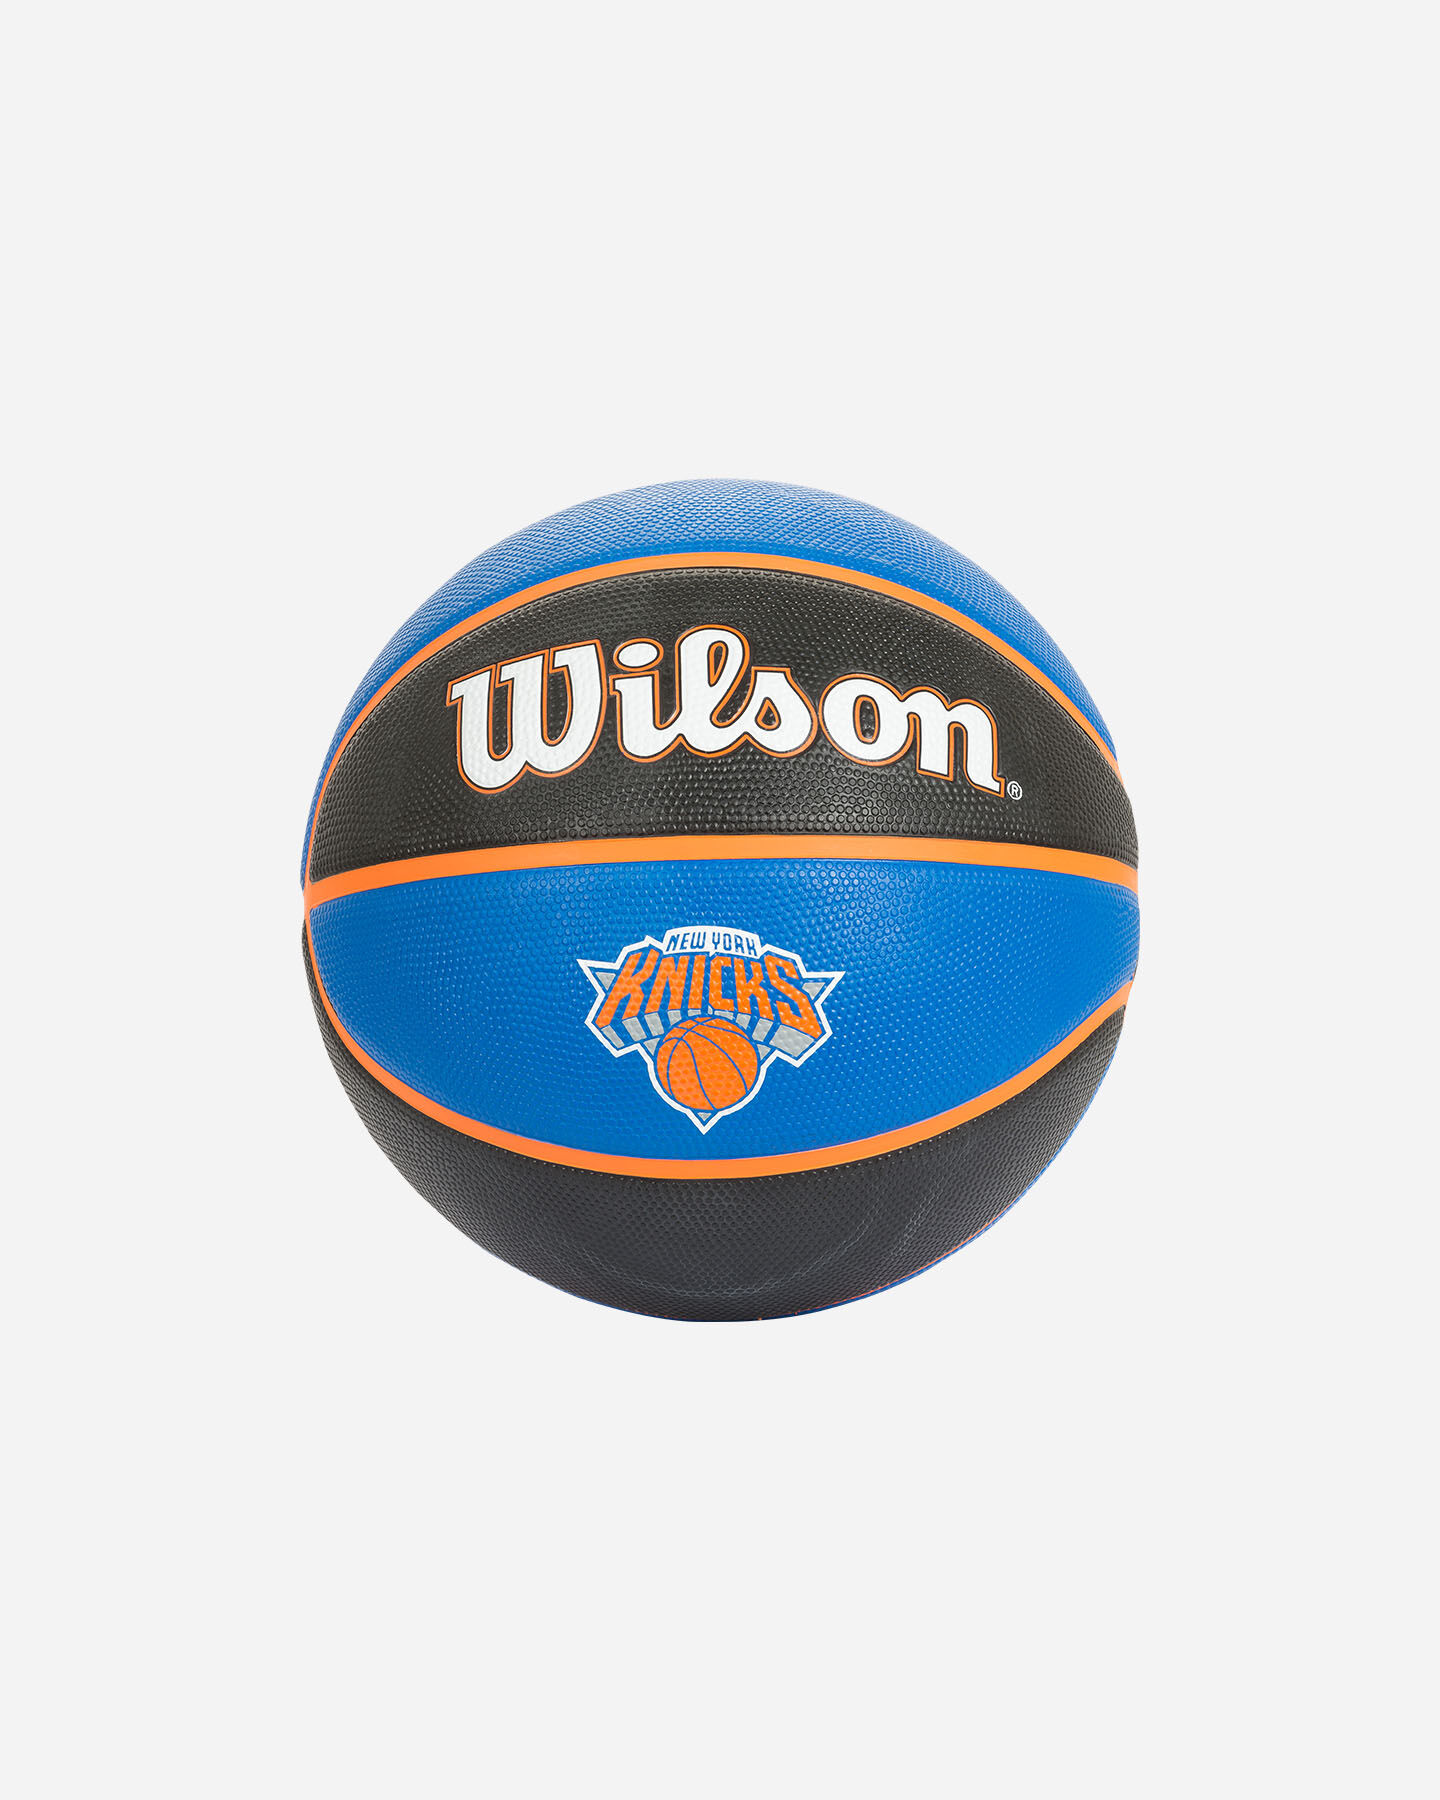  Pallone basket WILSON NBA TRIBUTE TEAM NEW YORK KNICKS S5331476|UNI|OFFICIAL scatto 0